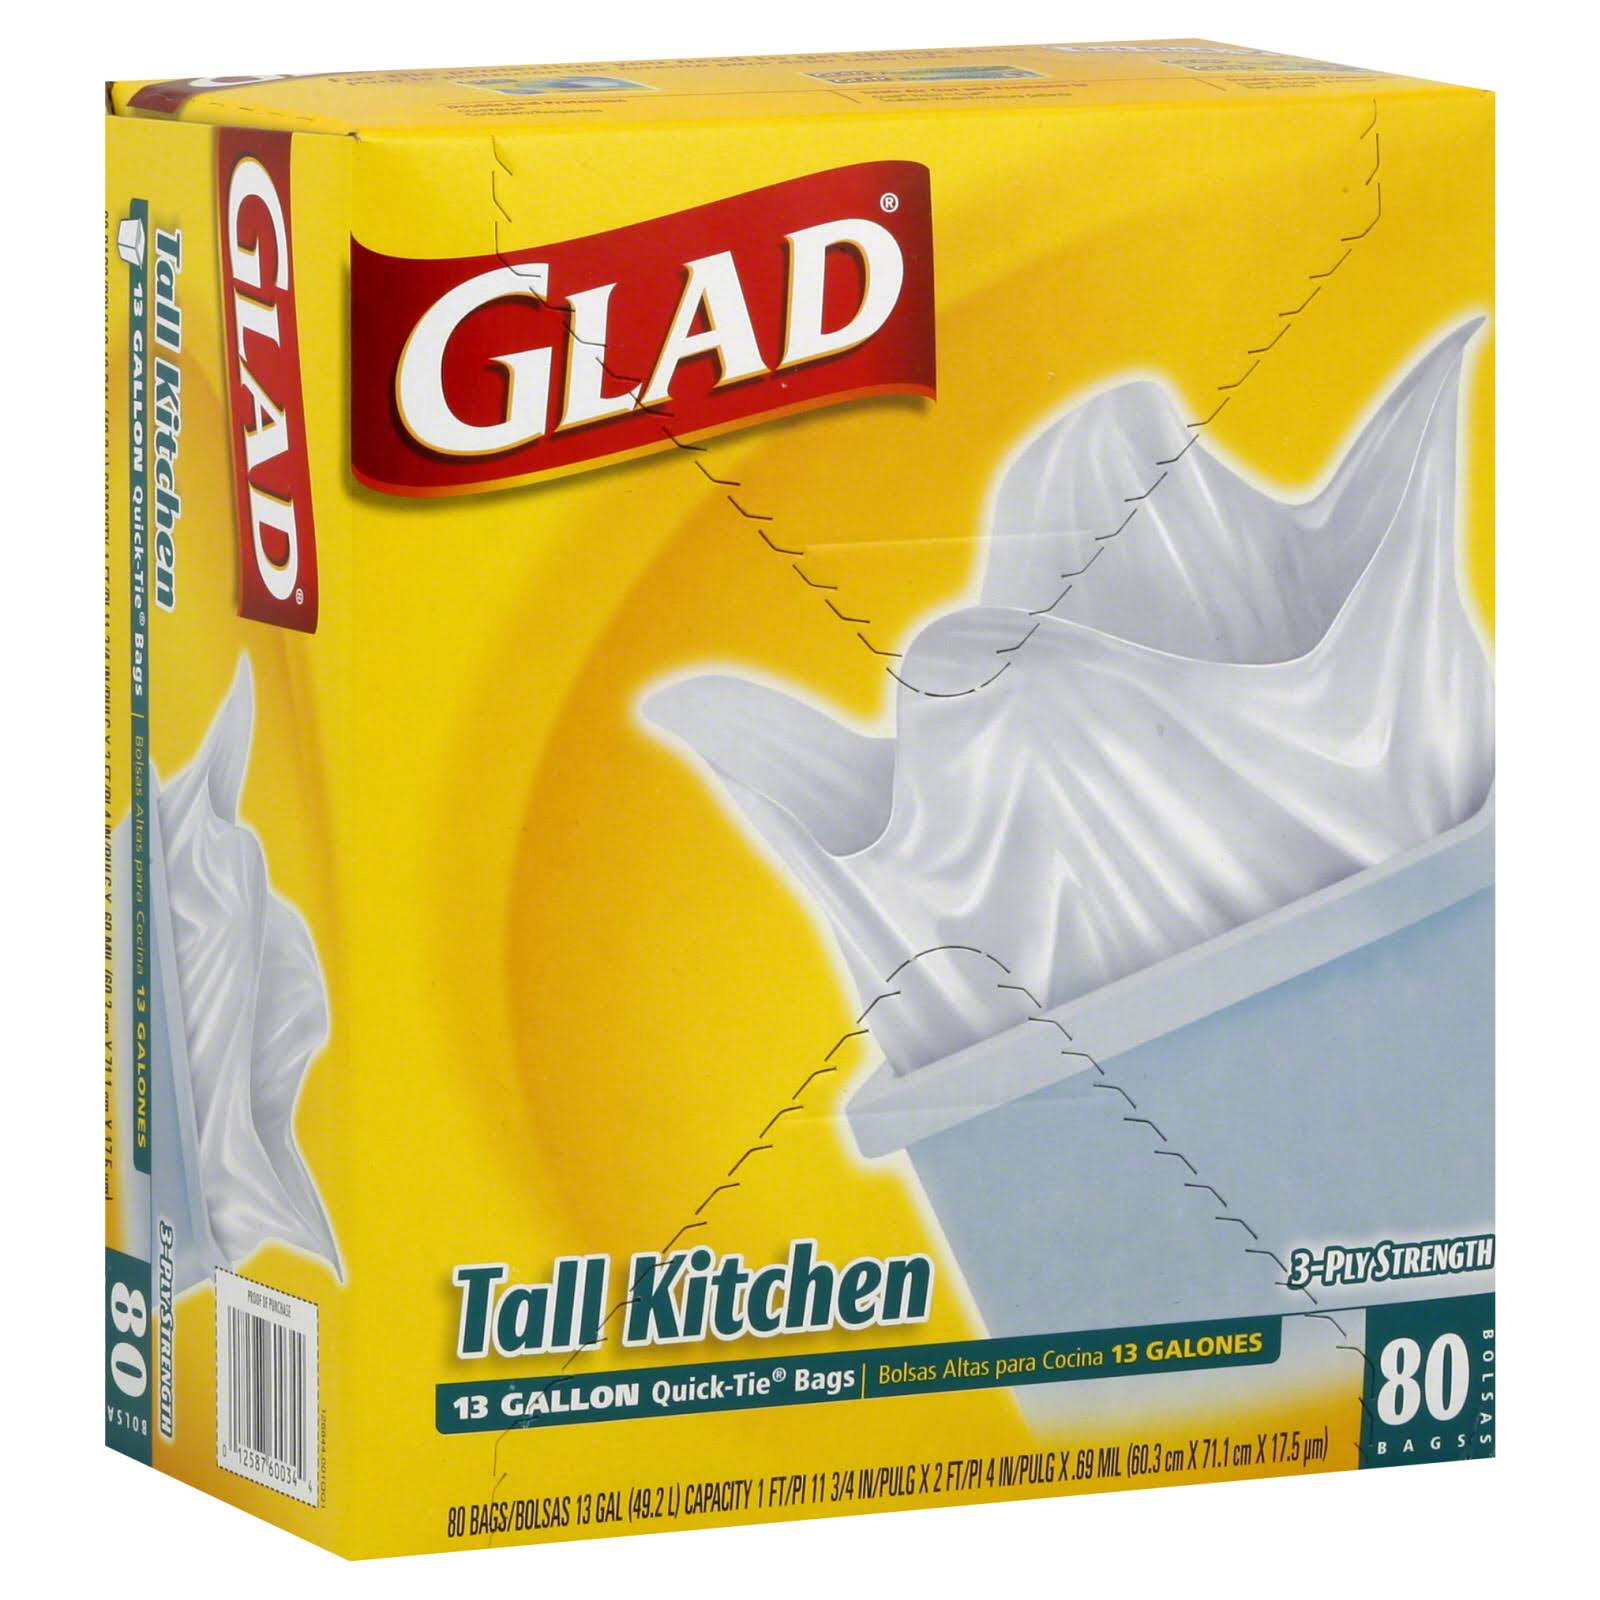 Glad Tall Kitchen Quick-Tie Trash Bags - 80 Bags